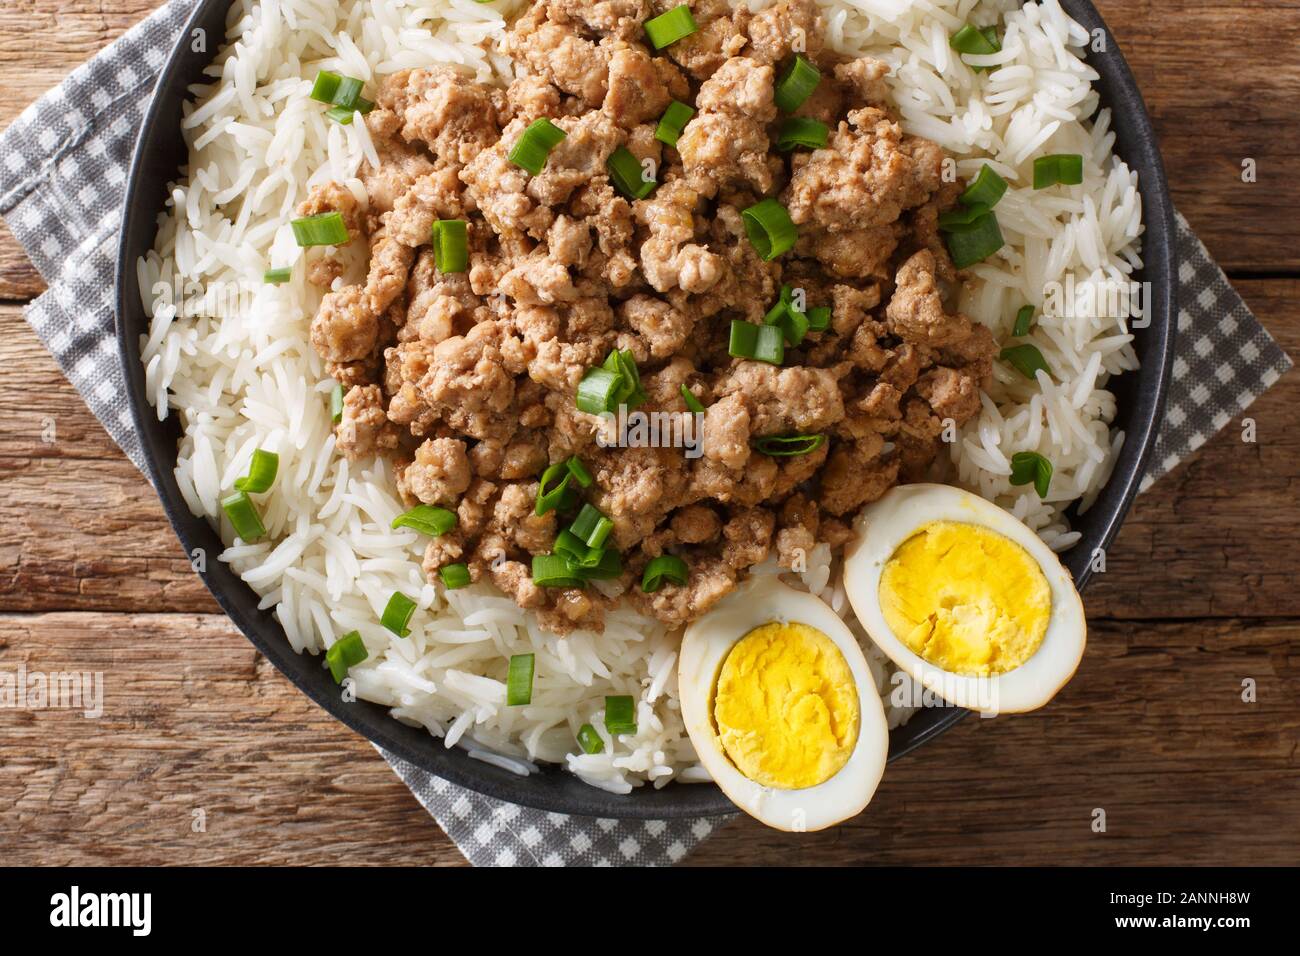 Lu Rou Fan Is A Popular Taiwanese Dish Consisting Of Ground Pork Braised In Soy Sauce Five Spice Powder And Rice Wine Served Over Rice Close Up In A Stock Photo Alamy